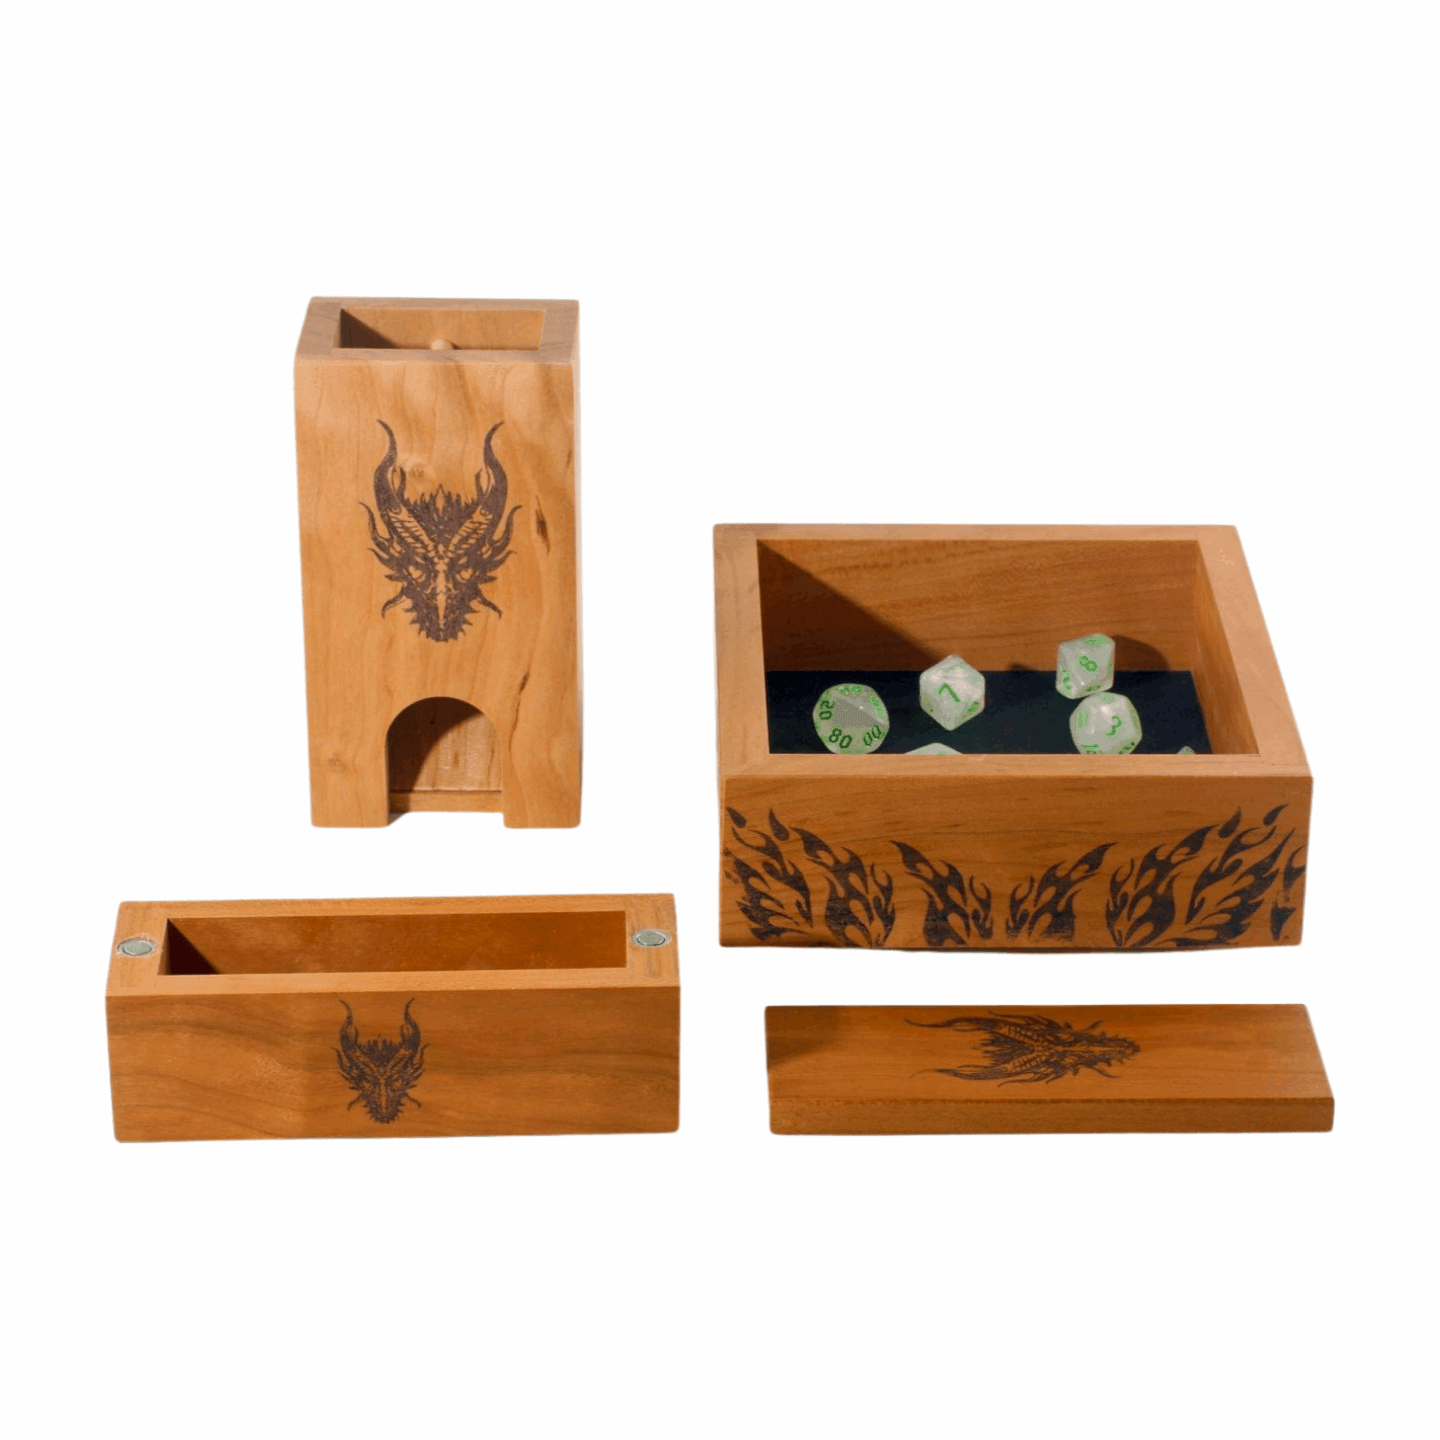 Image of pieces included in combo pack: dice tower, dice tray, dice vault with magnetic closure